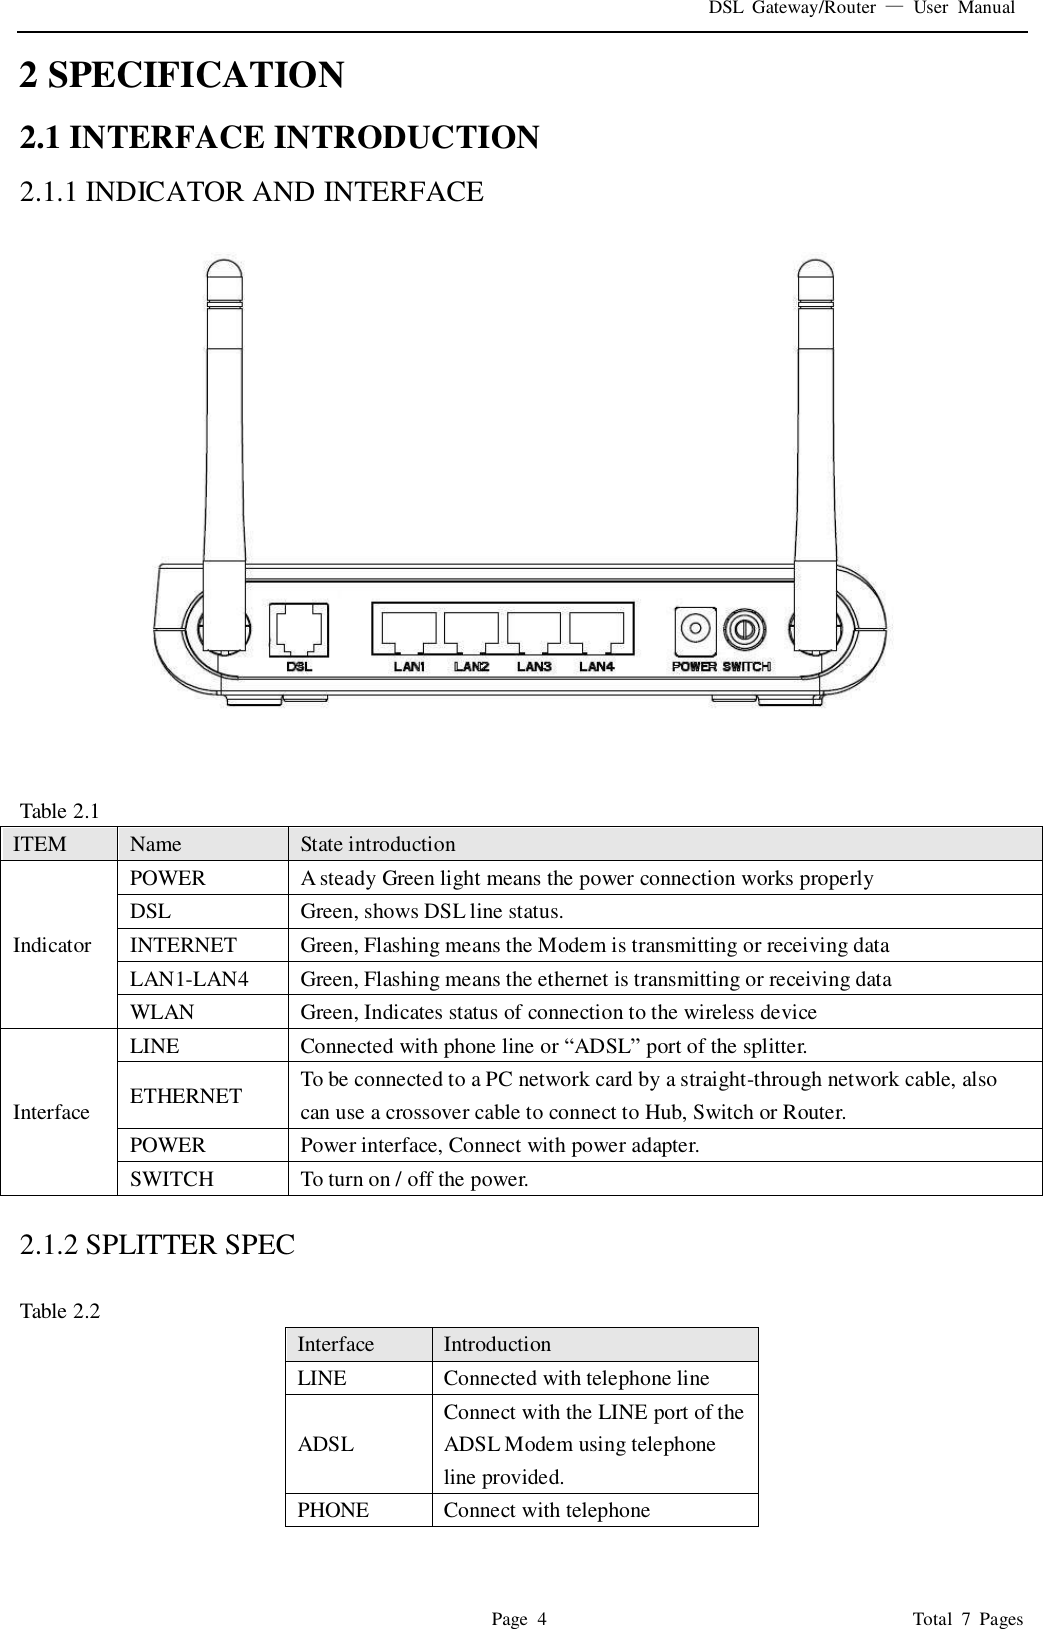 DSL  Gateway/Router  —  User  Manual   Page  4                                                                              Total  7  Pages 2 SPECIFICATION 2.1 INTERFACE INTRODUCTION 2.1.1 INDICATOR AND INTERFACE   Table 2.1 ITEM Name State introduction Indicator POWER A steady Green light means the power connection works properly DSL Green, shows DSL line status. INTERNET Green, Flashing means the Modem is transmitting or receiving data LAN1-LAN4 Green, Flashing means the ethernet is transmitting or receiving data WLAN Green, Indicates status of connection to the wireless device Interface LINE Connected with phone line or “ADSL” port of the splitter.   ETHERNET To be connected to a PC network card by a straight-through network cable, also can use a crossover cable to connect to Hub, Switch or Router. POWER Power interface, Connect with power adapter. SWITCH To turn on / off the power.  2.1.2 SPLITTER SPEC  Table 2.2 Interface   Introduction LINE Connected with telephone line   ADSL Connect with the LINE port of the ADSL Modem using telephone line provided. PHONE Connect with telephone  